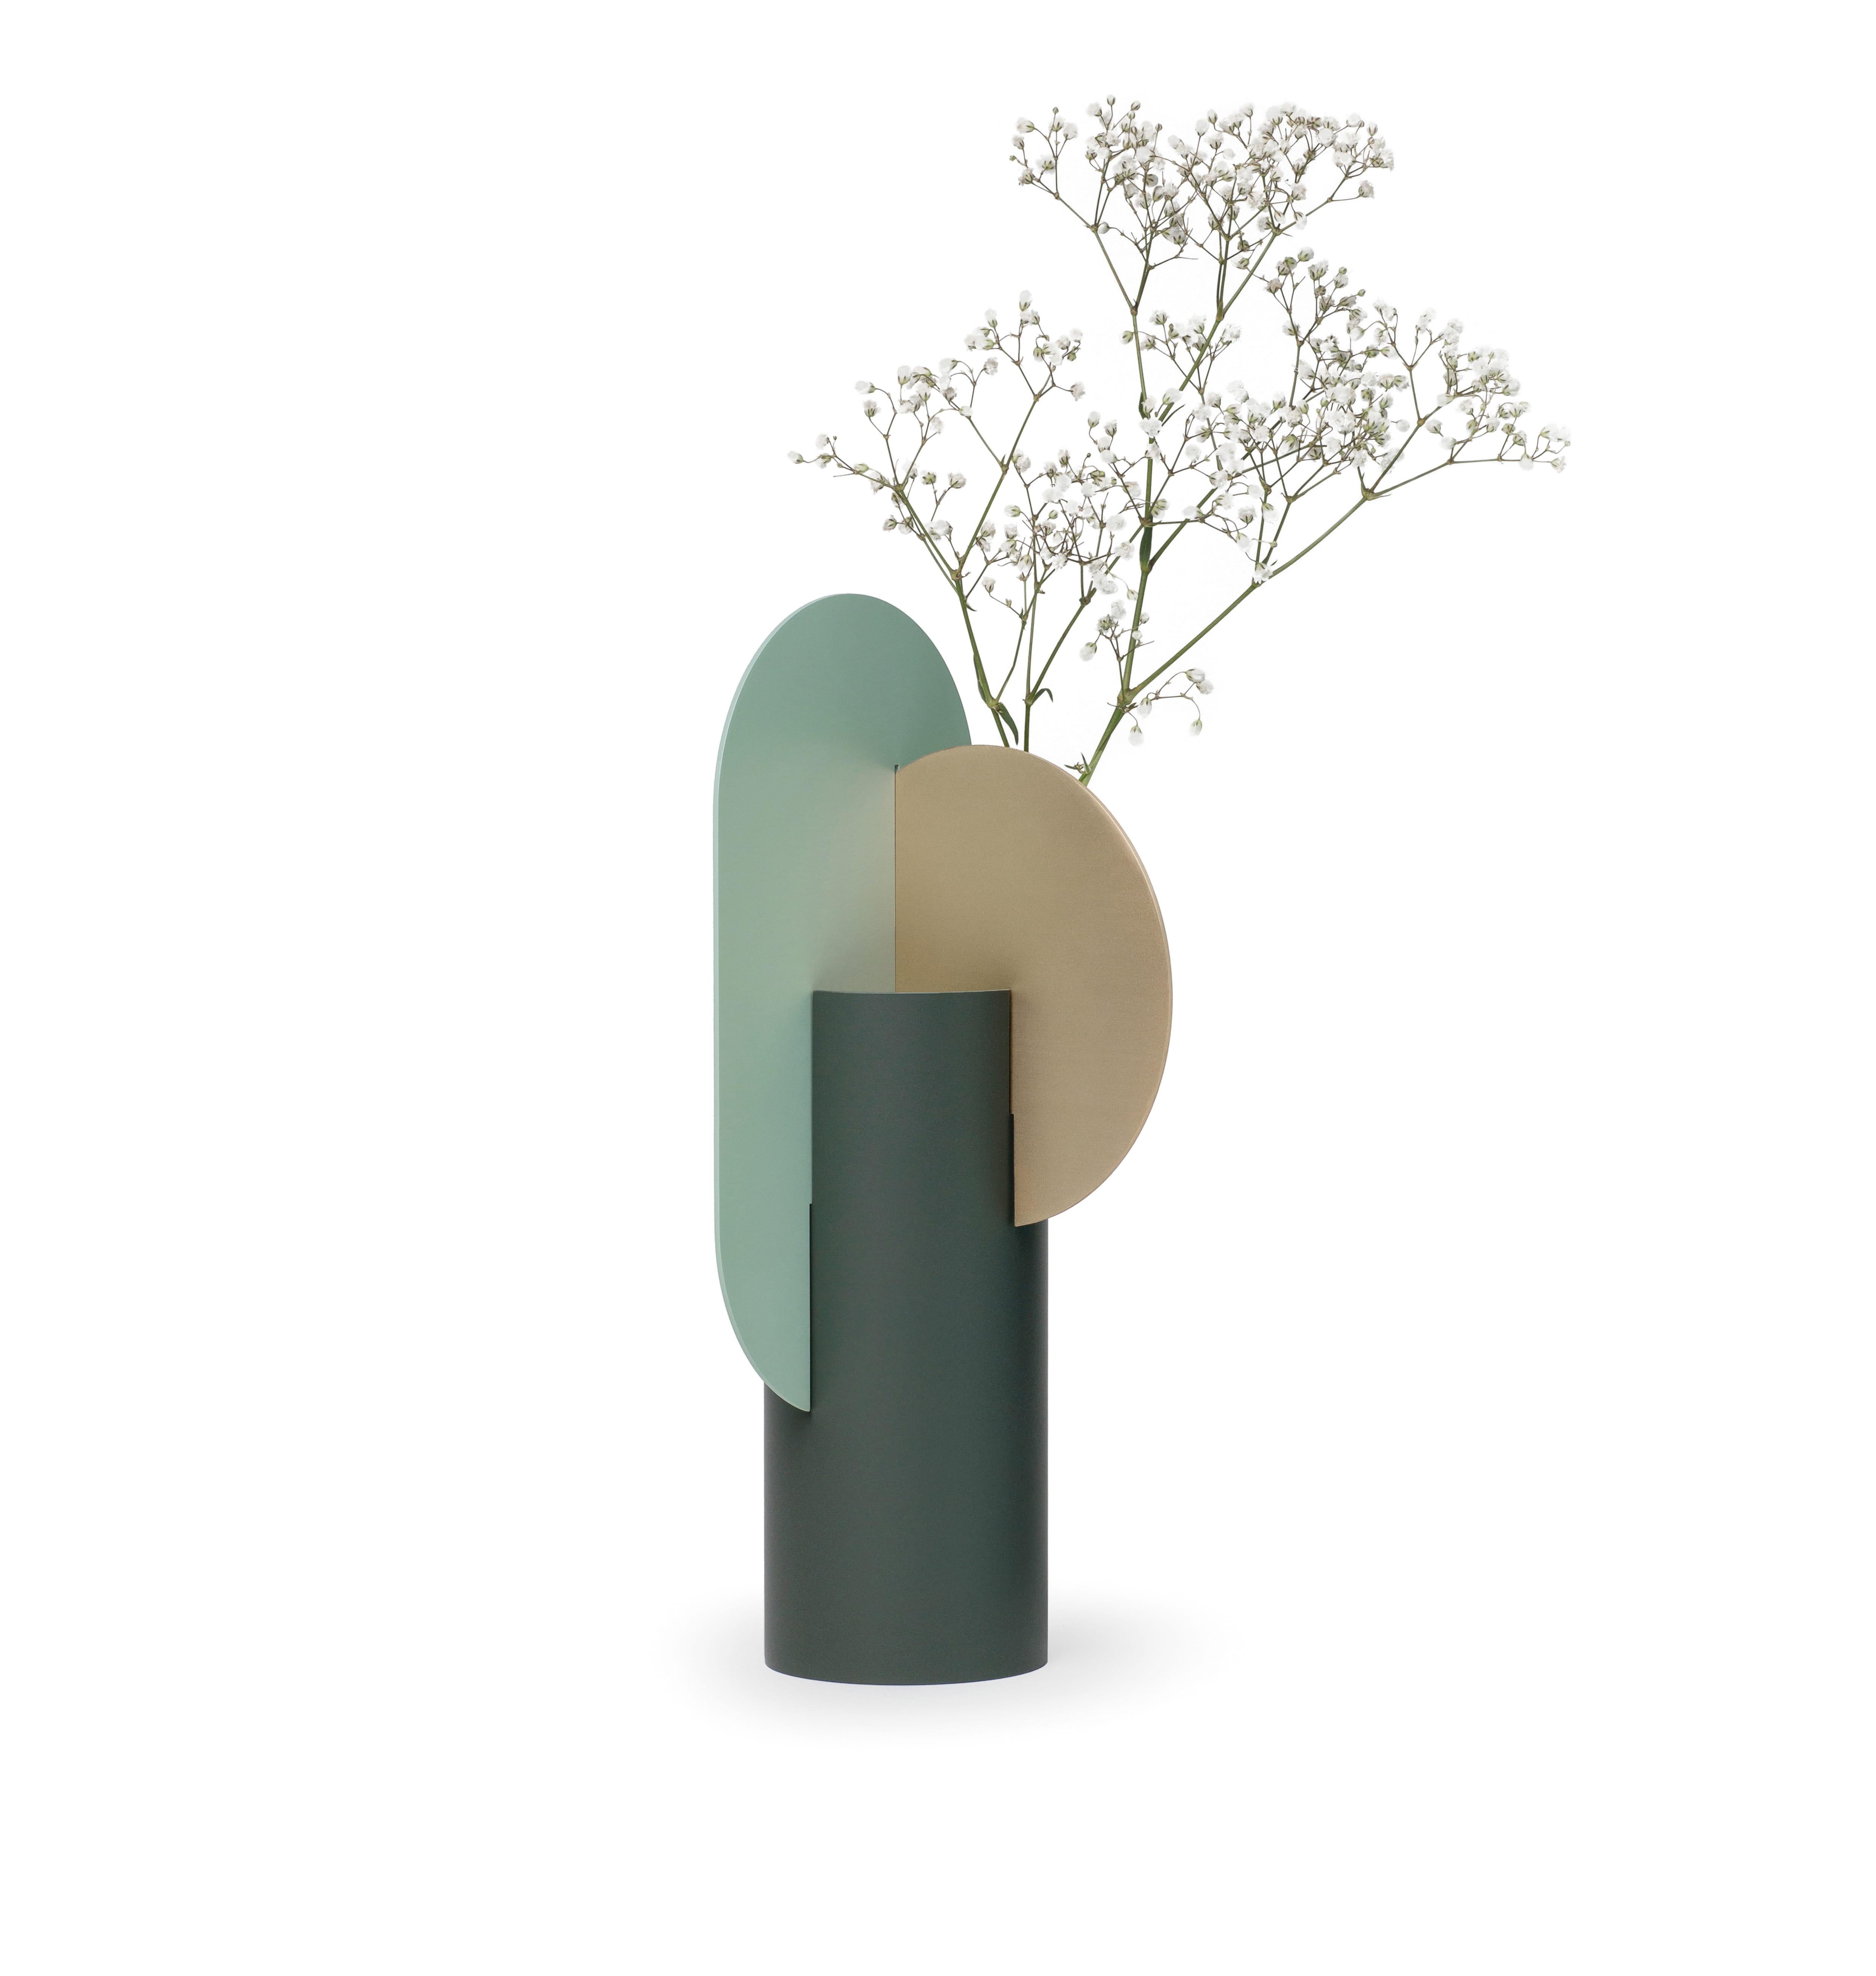 Yermilov vase CS2 by NOOM
Dimensions: 15 cm x 17.5 cm x H 37 cm
Materials: Brass, painted steel. Color scheme: pine green, sage green, and brass. 
Each NOOM product comes in a premium gift box. 

NOOM is a young rapidly growing design company